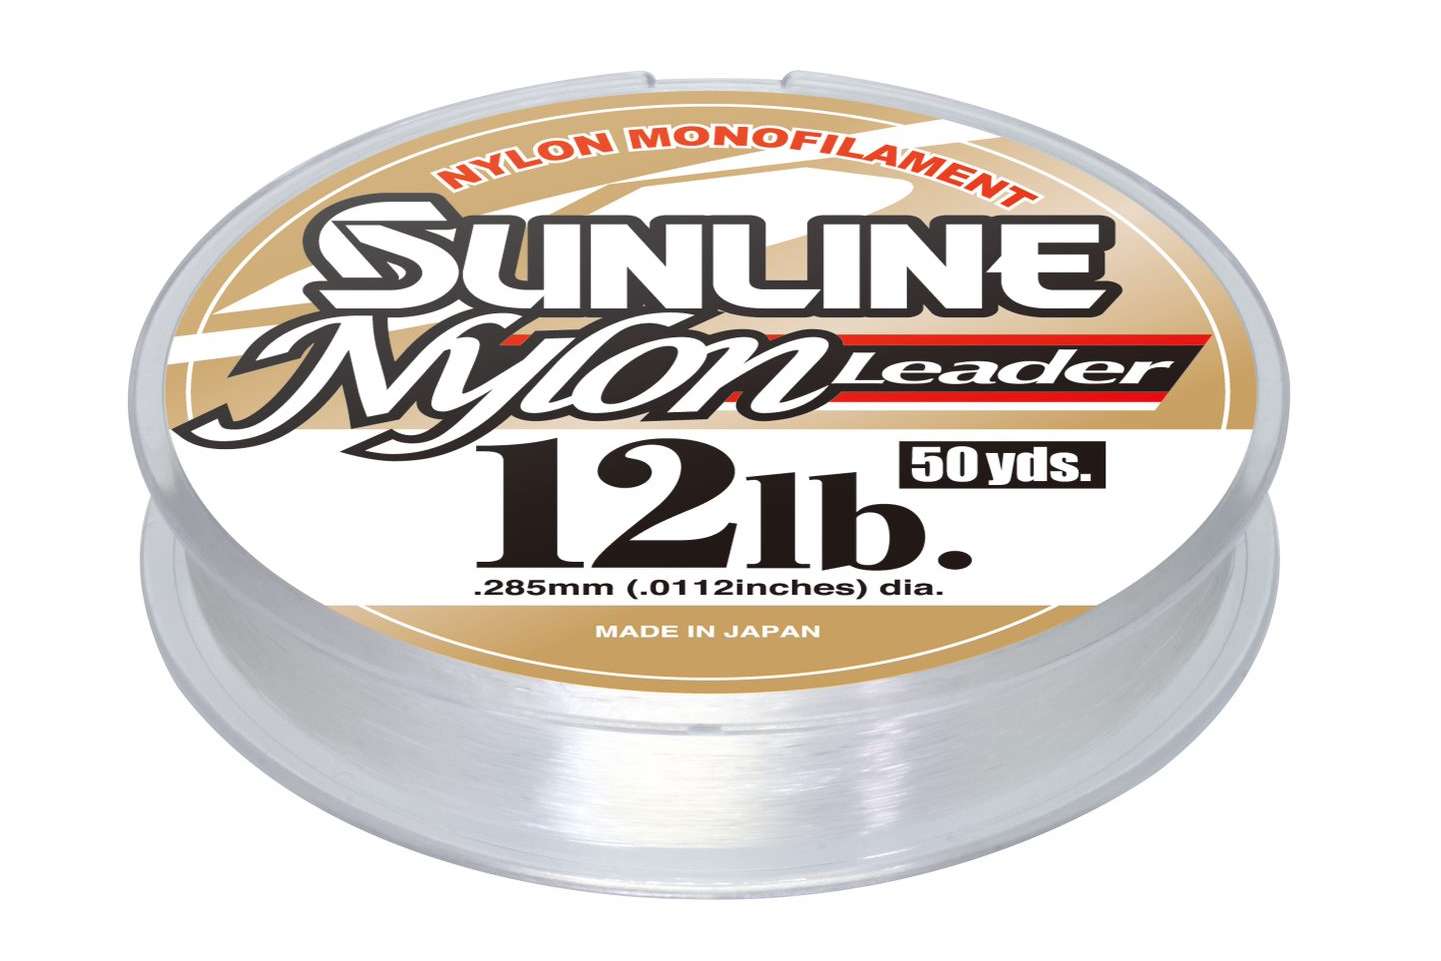 <p><b>Sunline Nylon Leader </b></p>
<p>A premium nylon designed specifically for leader and top shot applications. This nylon leader is a great choice for use with mainline braid when you want to have a more buoyant leader with baits like topwaters. This is not just a regular nylon in a different package, it is a special master-batch nylon which provides high breaking strength and high tenacity. Nylon leader also has reduced water absorption, which prevents weakening in the line like many other regular nylons. Nylon leader is designed with shock absorption to prevent break offs from extreme shocks of sudden lure movement, aggressive strikes, or sudden fish surges. Nylon leader is offered in 8- and 16-pound tests in a 50-yard spool.  </p>
<p><a href=